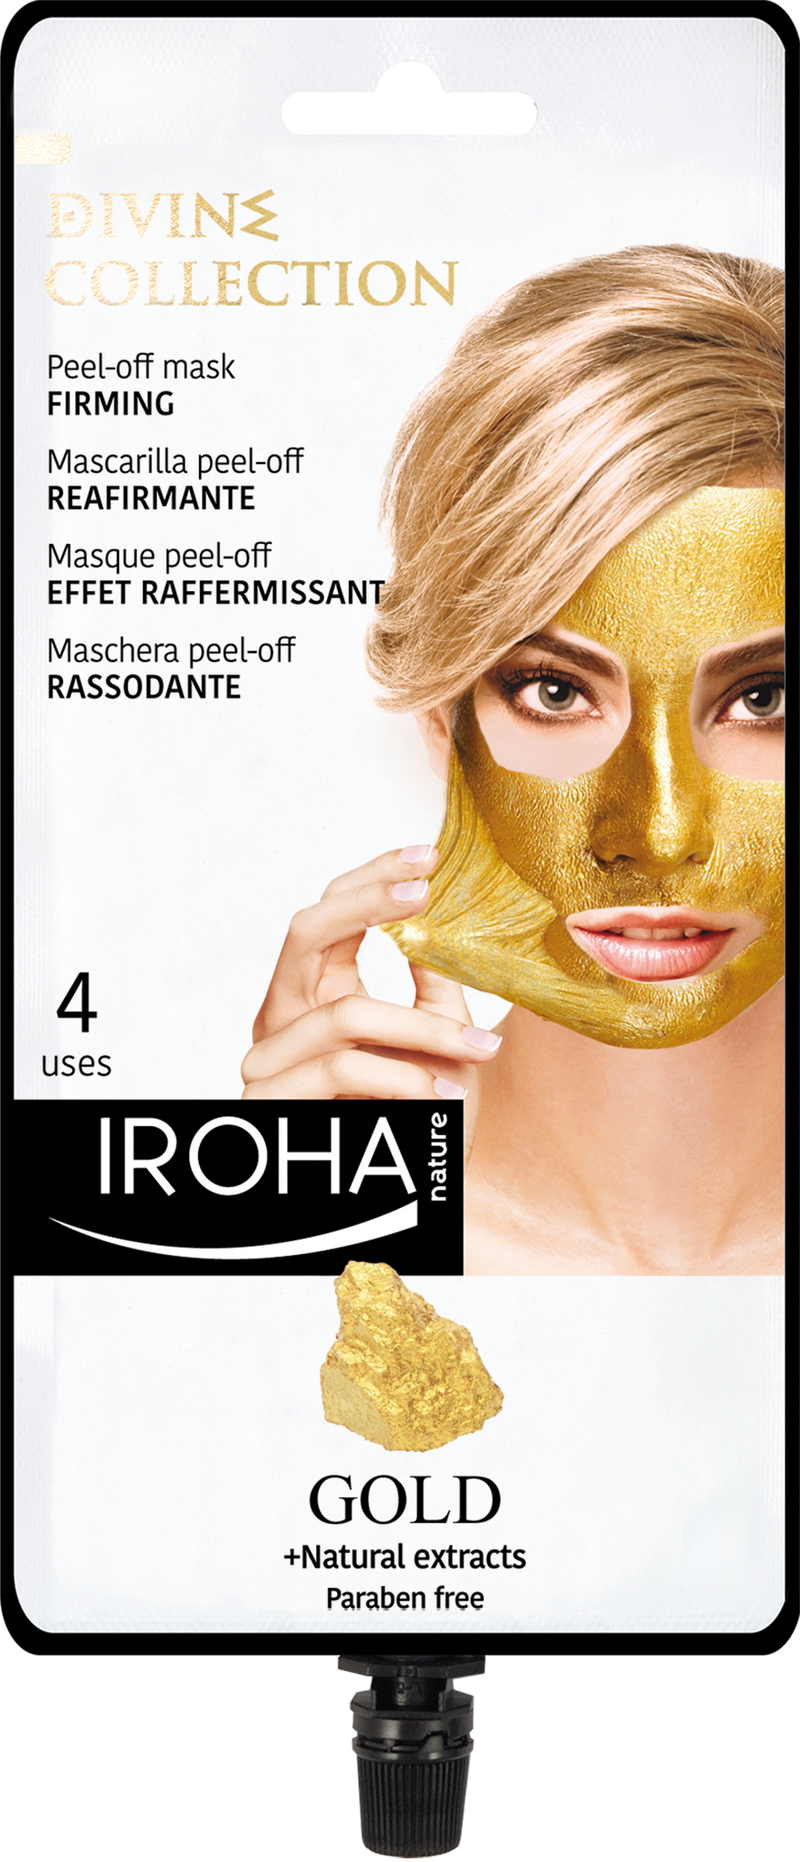 Firming Peel-Off Mask with 24K GOLD.